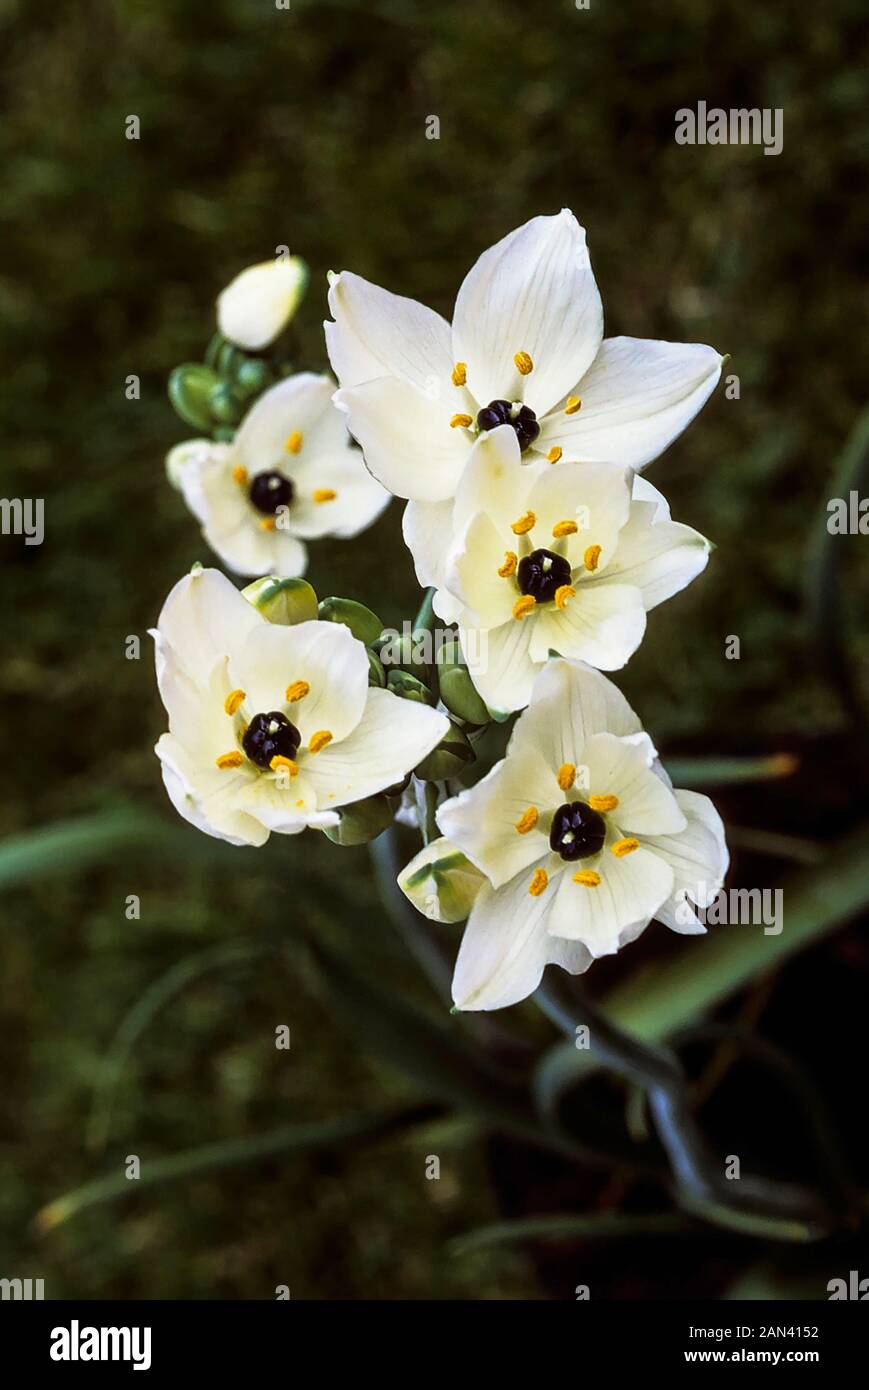 Ornithogalum arabicum Star of Bethlehem on a black background. A bulbous  perennial that has white flowers in early summer and is frost tender. Stock Photo